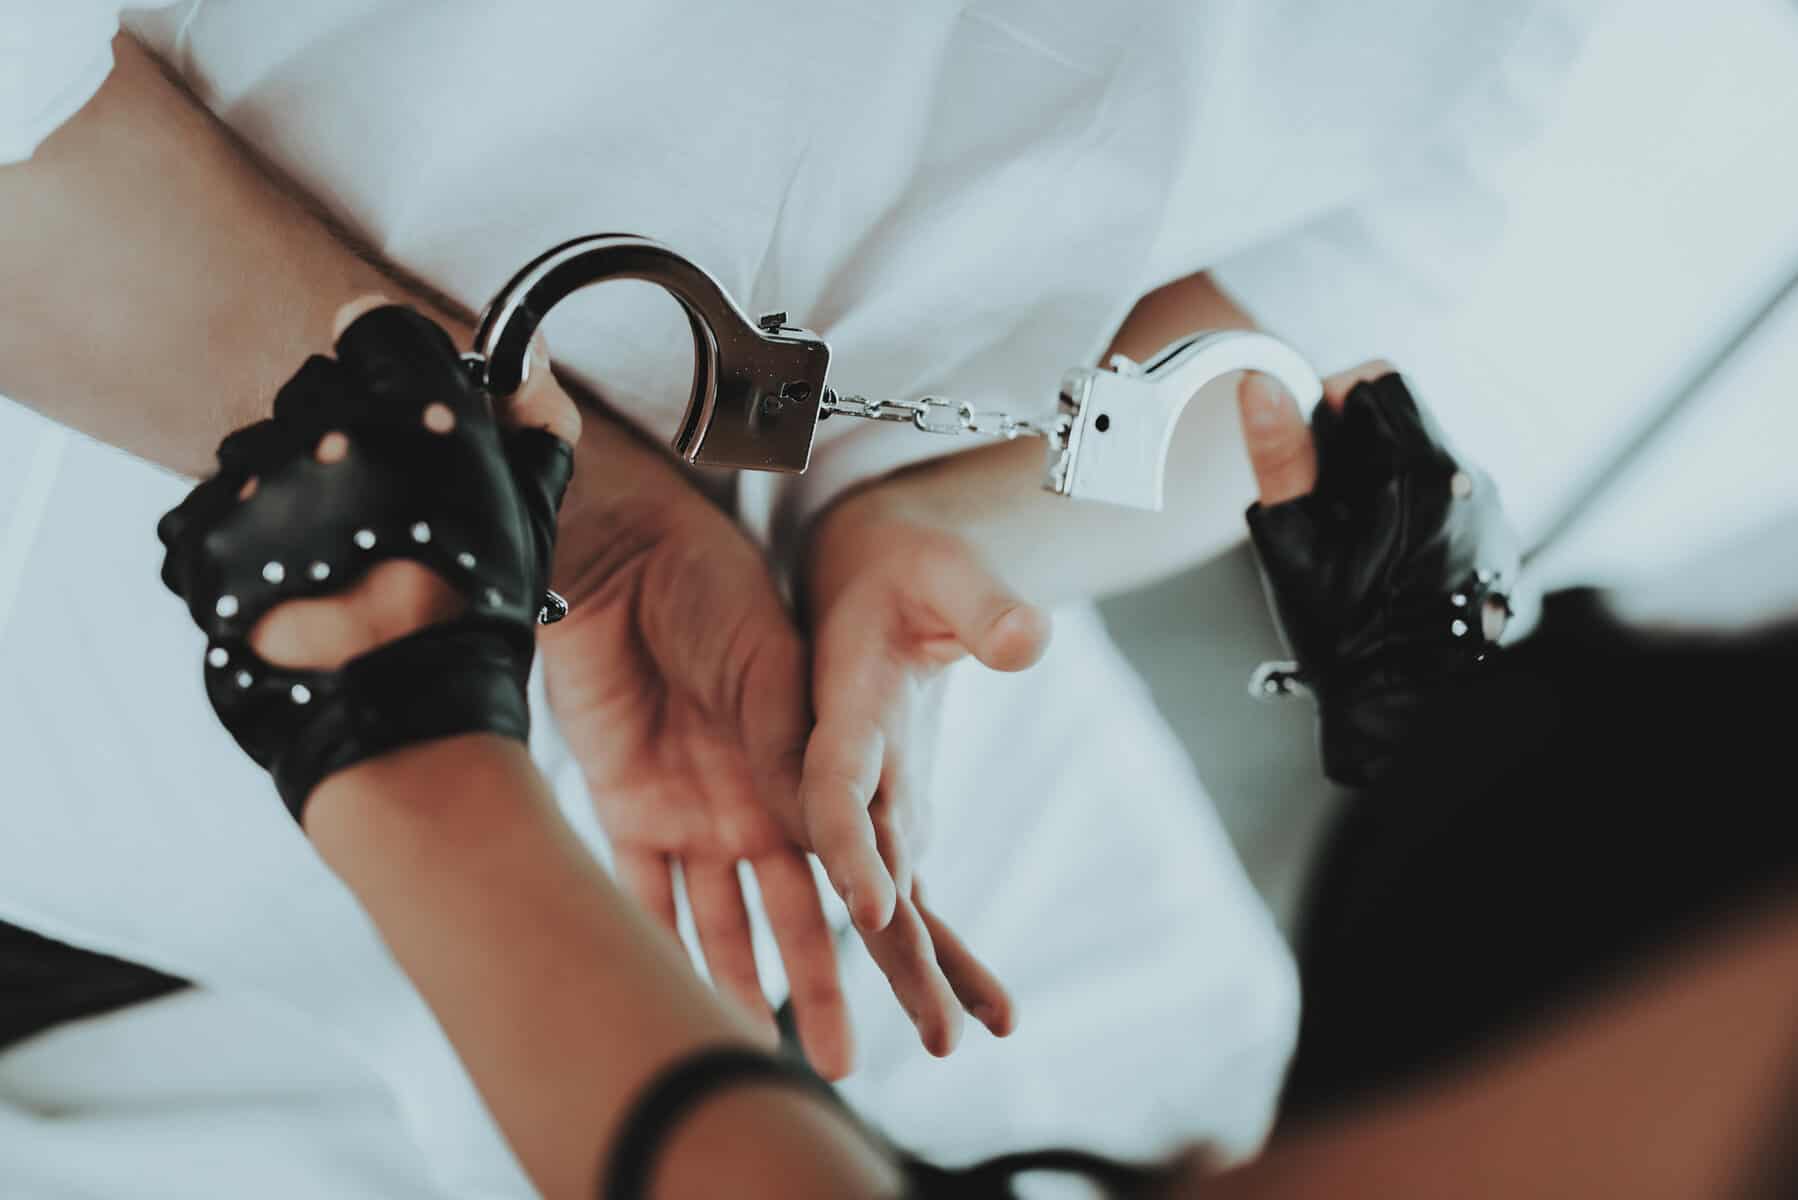 A person holding a pair of handcuffs in their hands